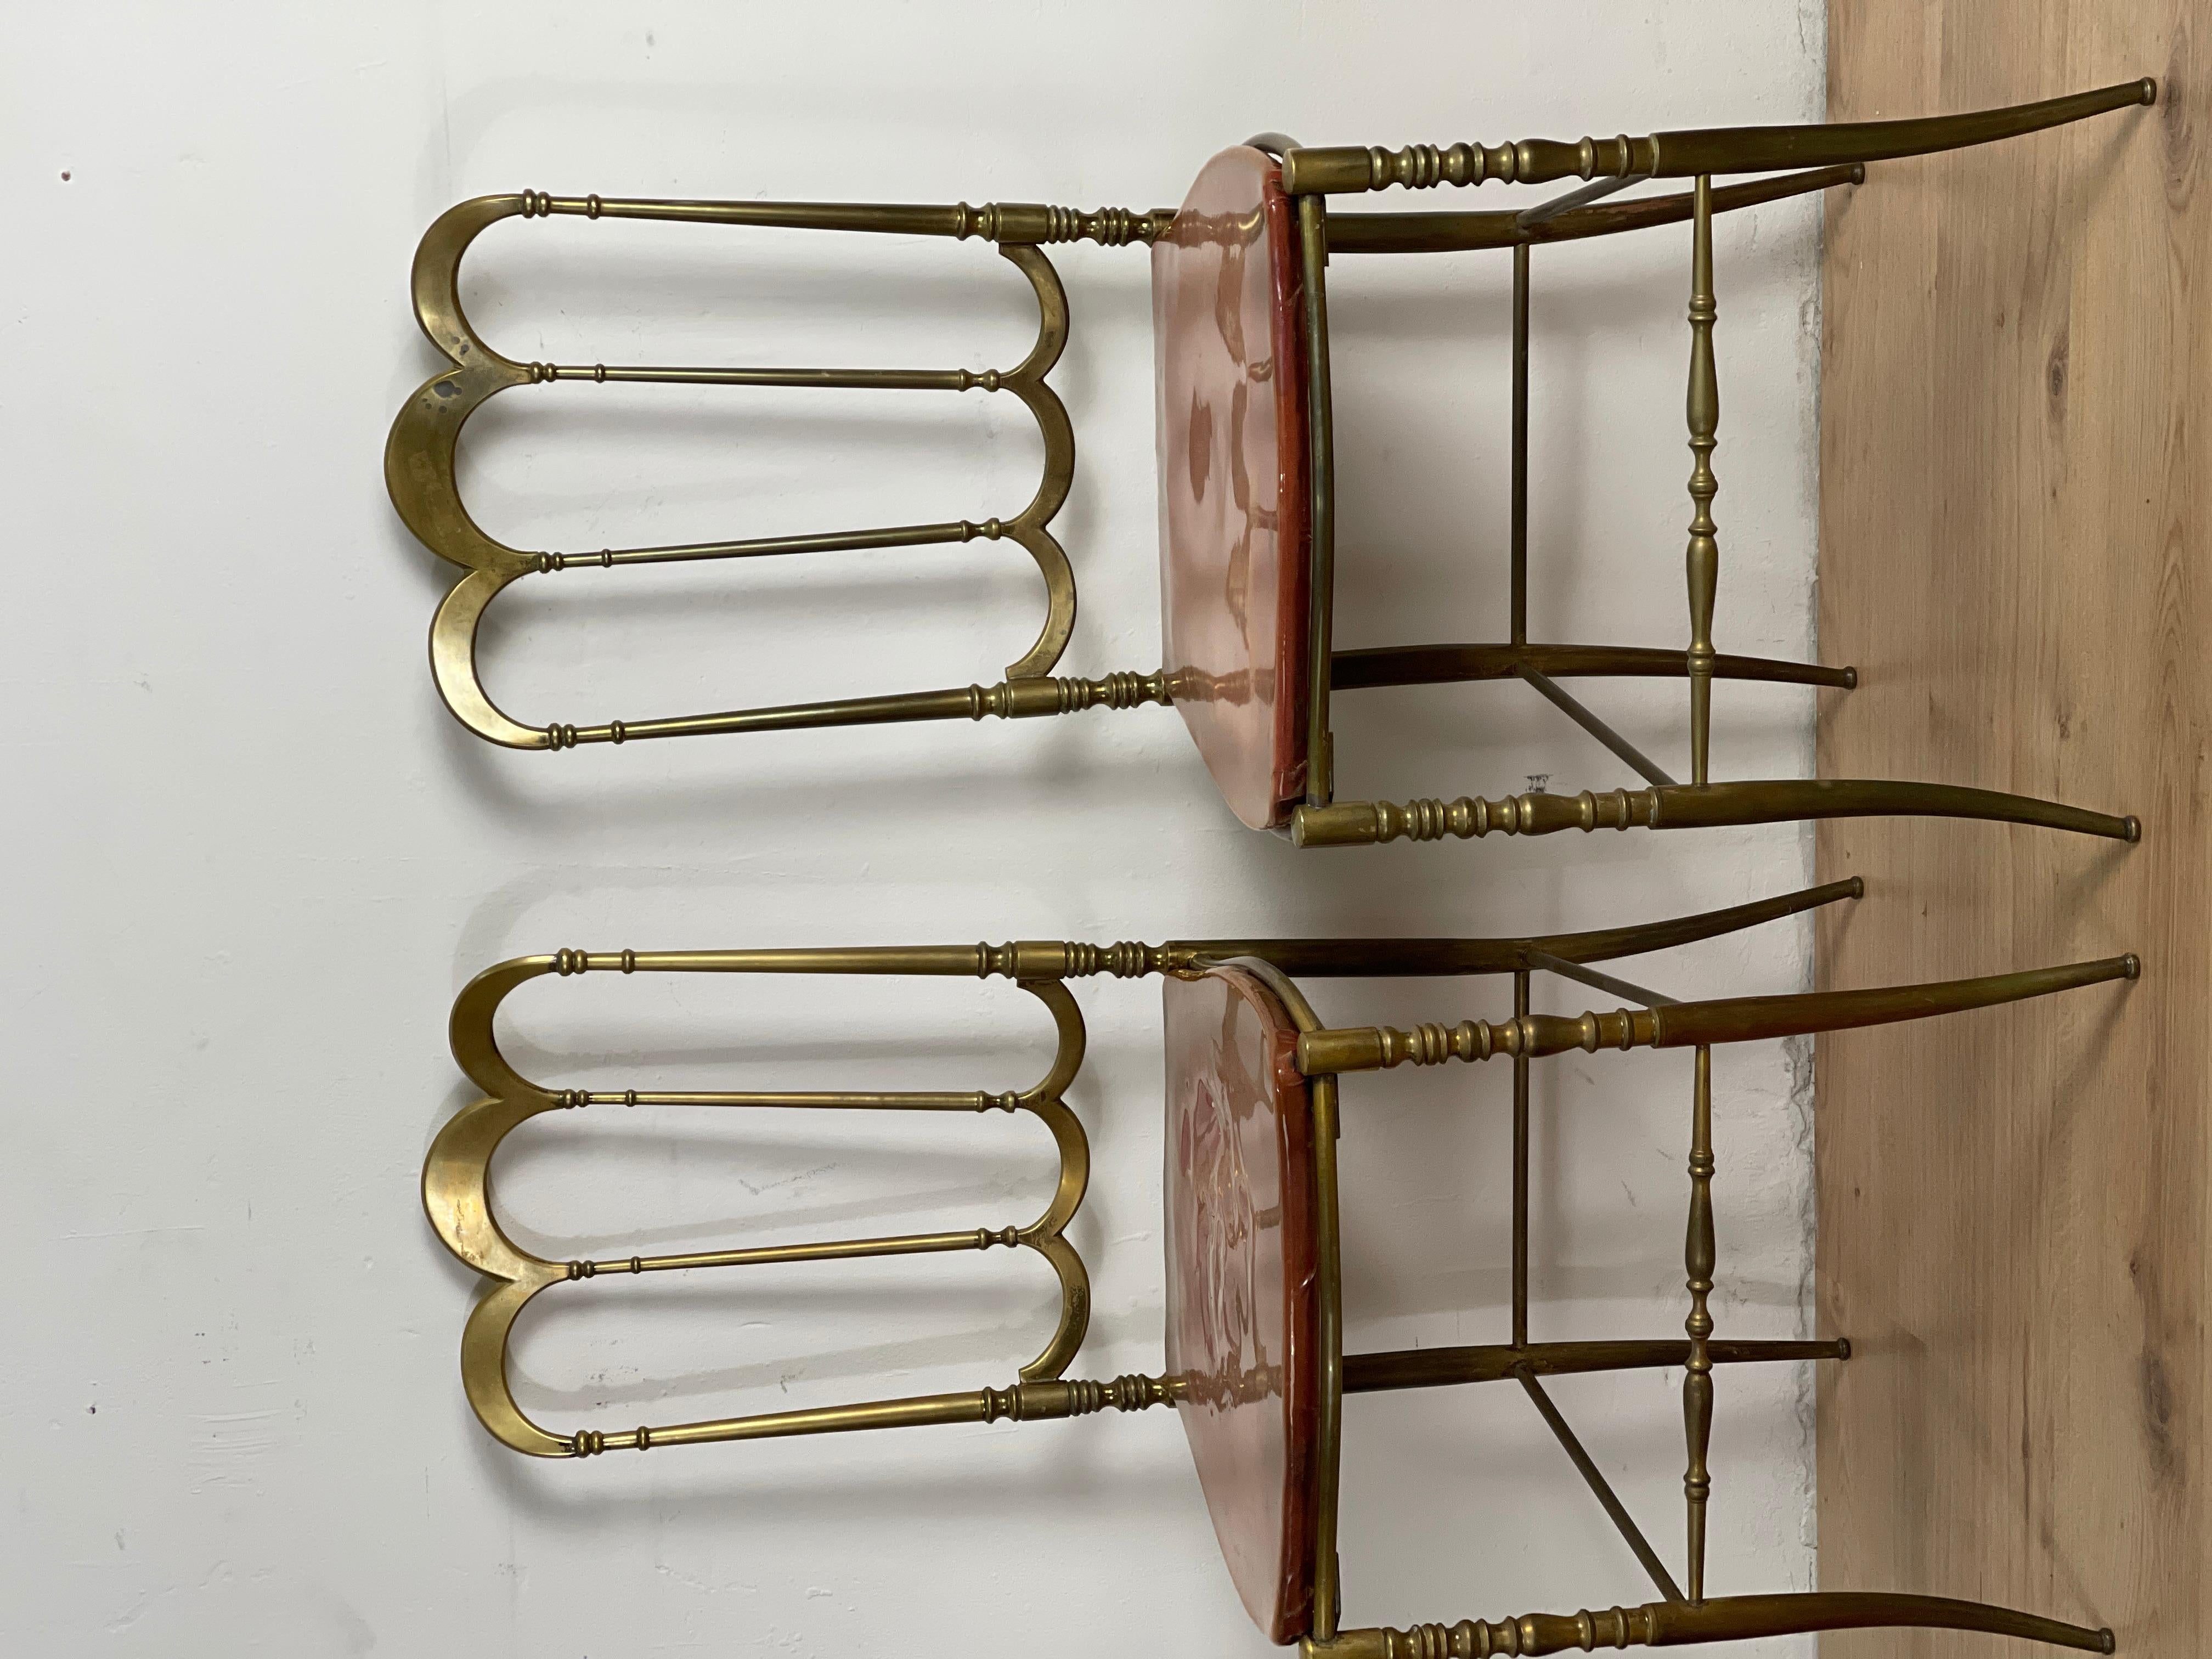 Pair of Chiavarina brass chairs, Italian production of the 1950s, of fine workmanship.